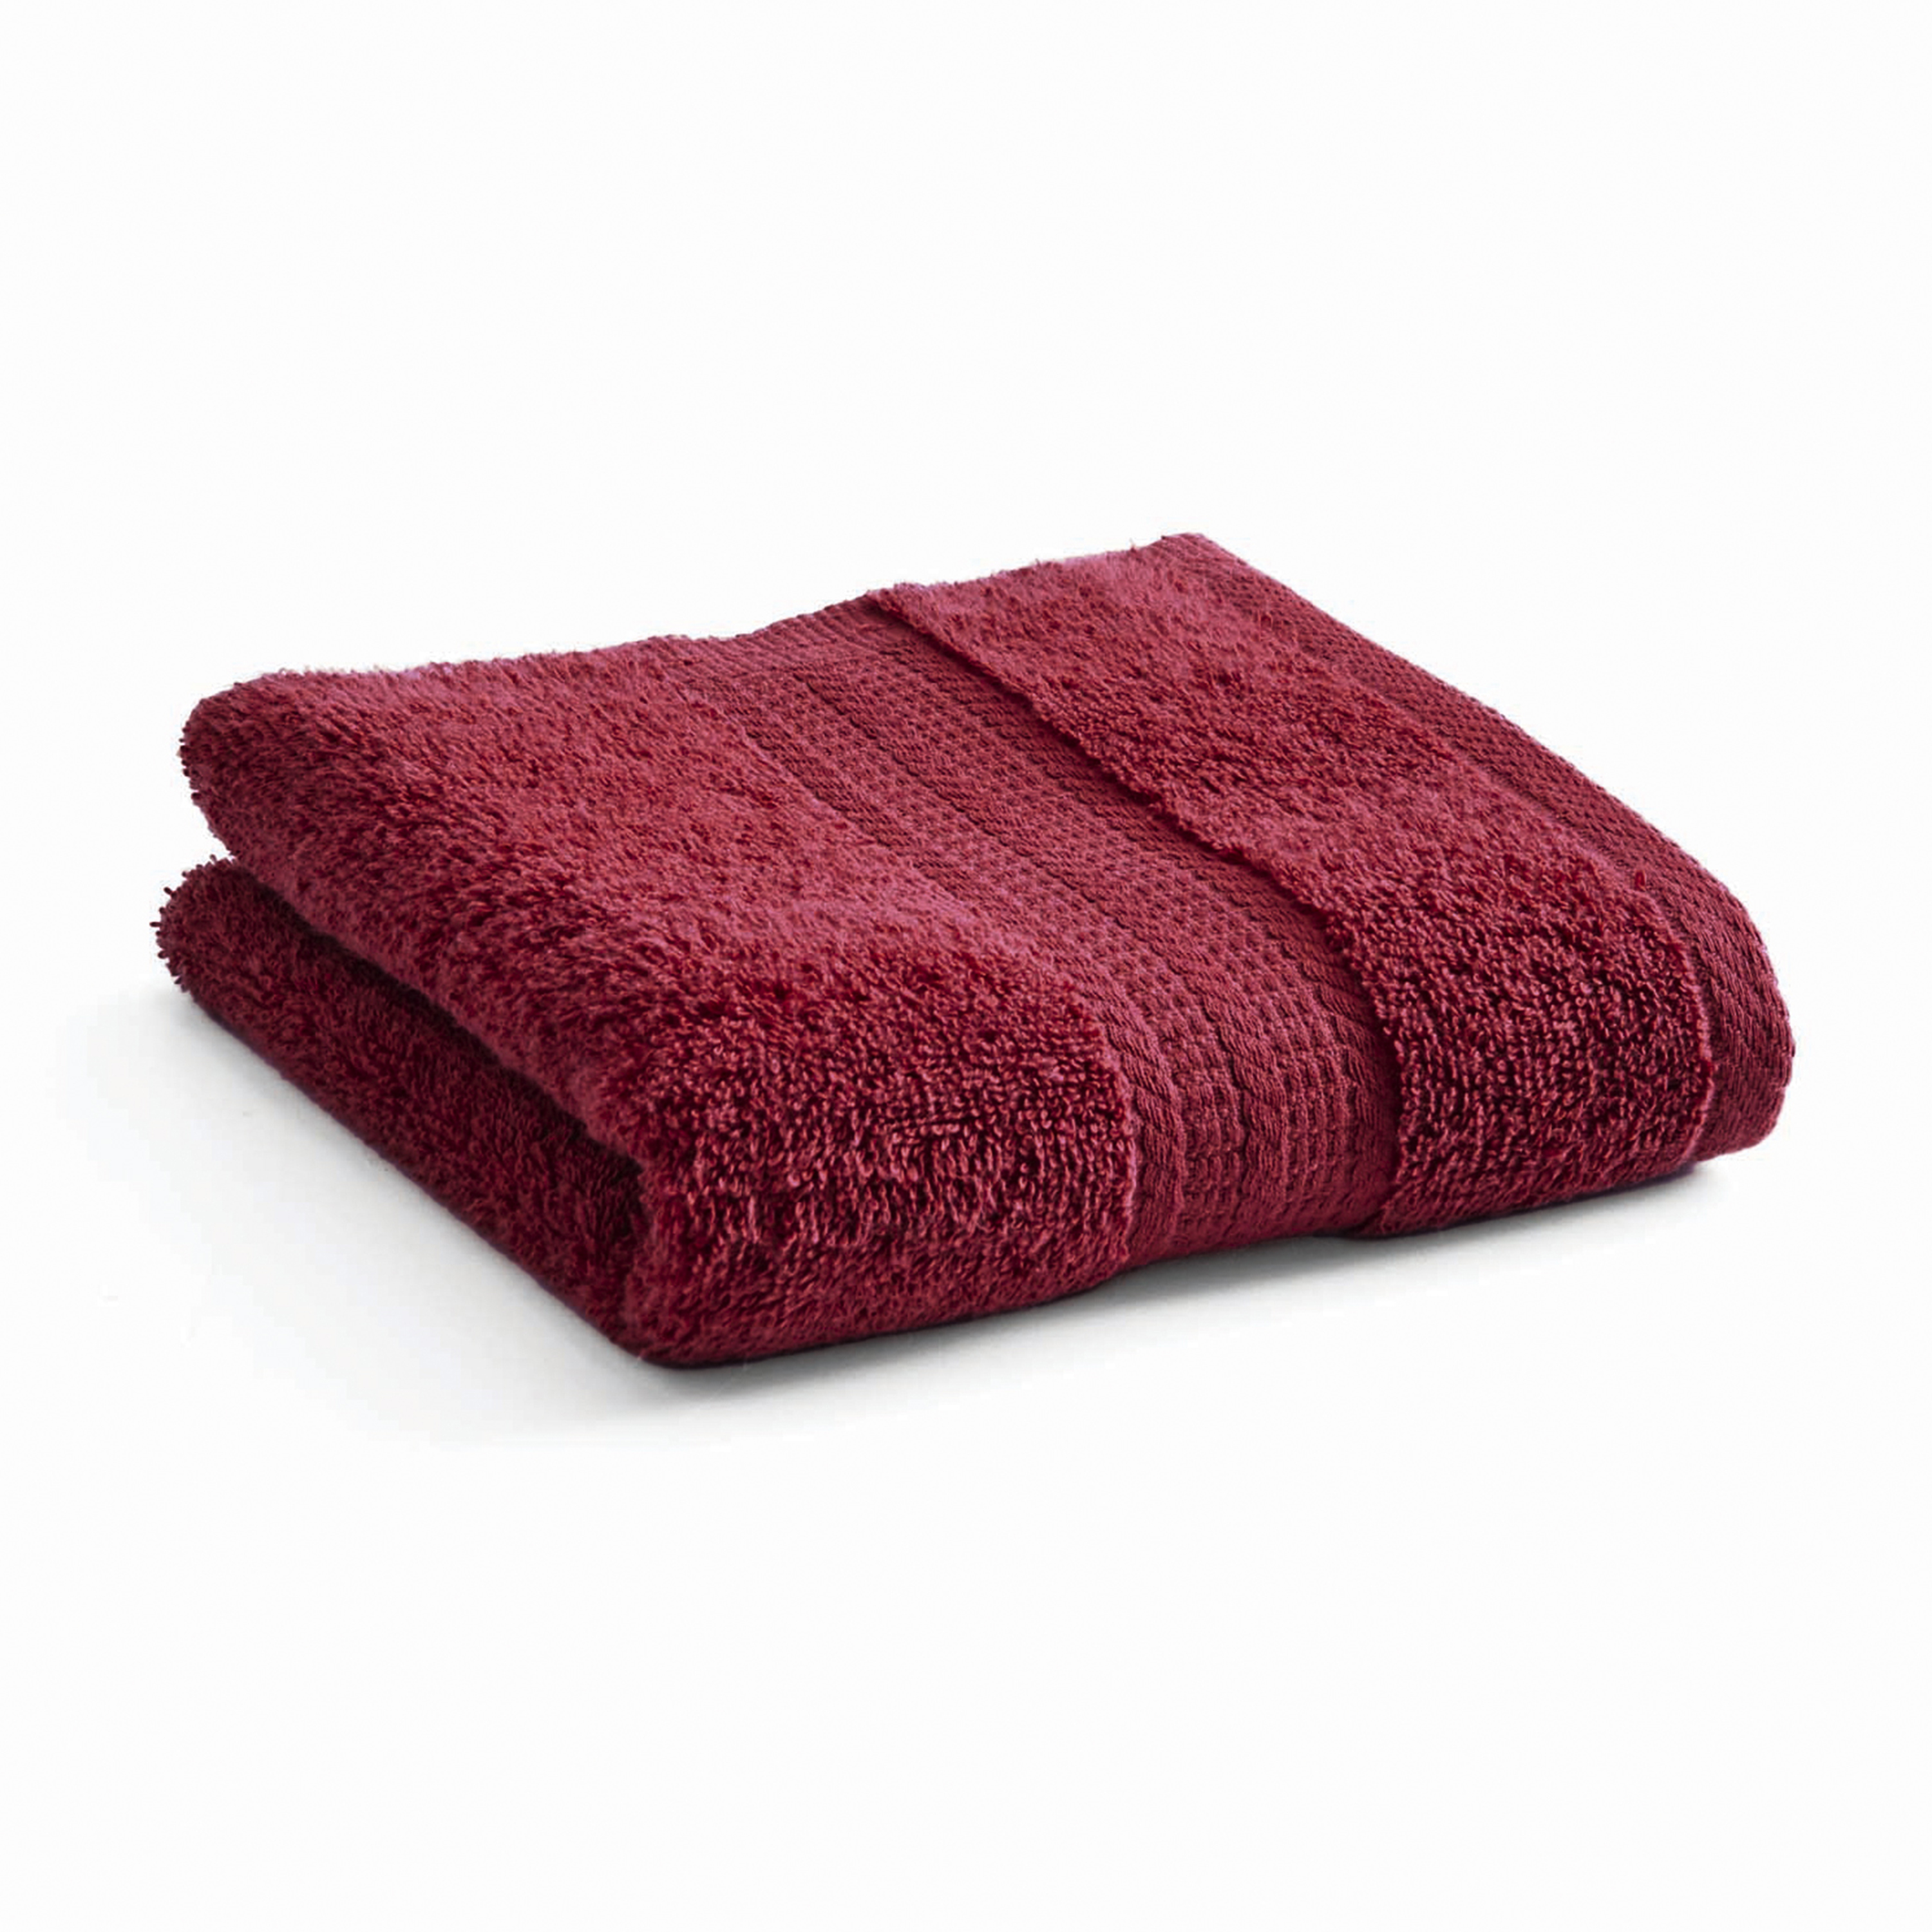 Better Homes & Gardens Adult Hand Towel, Solid Red - image 1 of 7